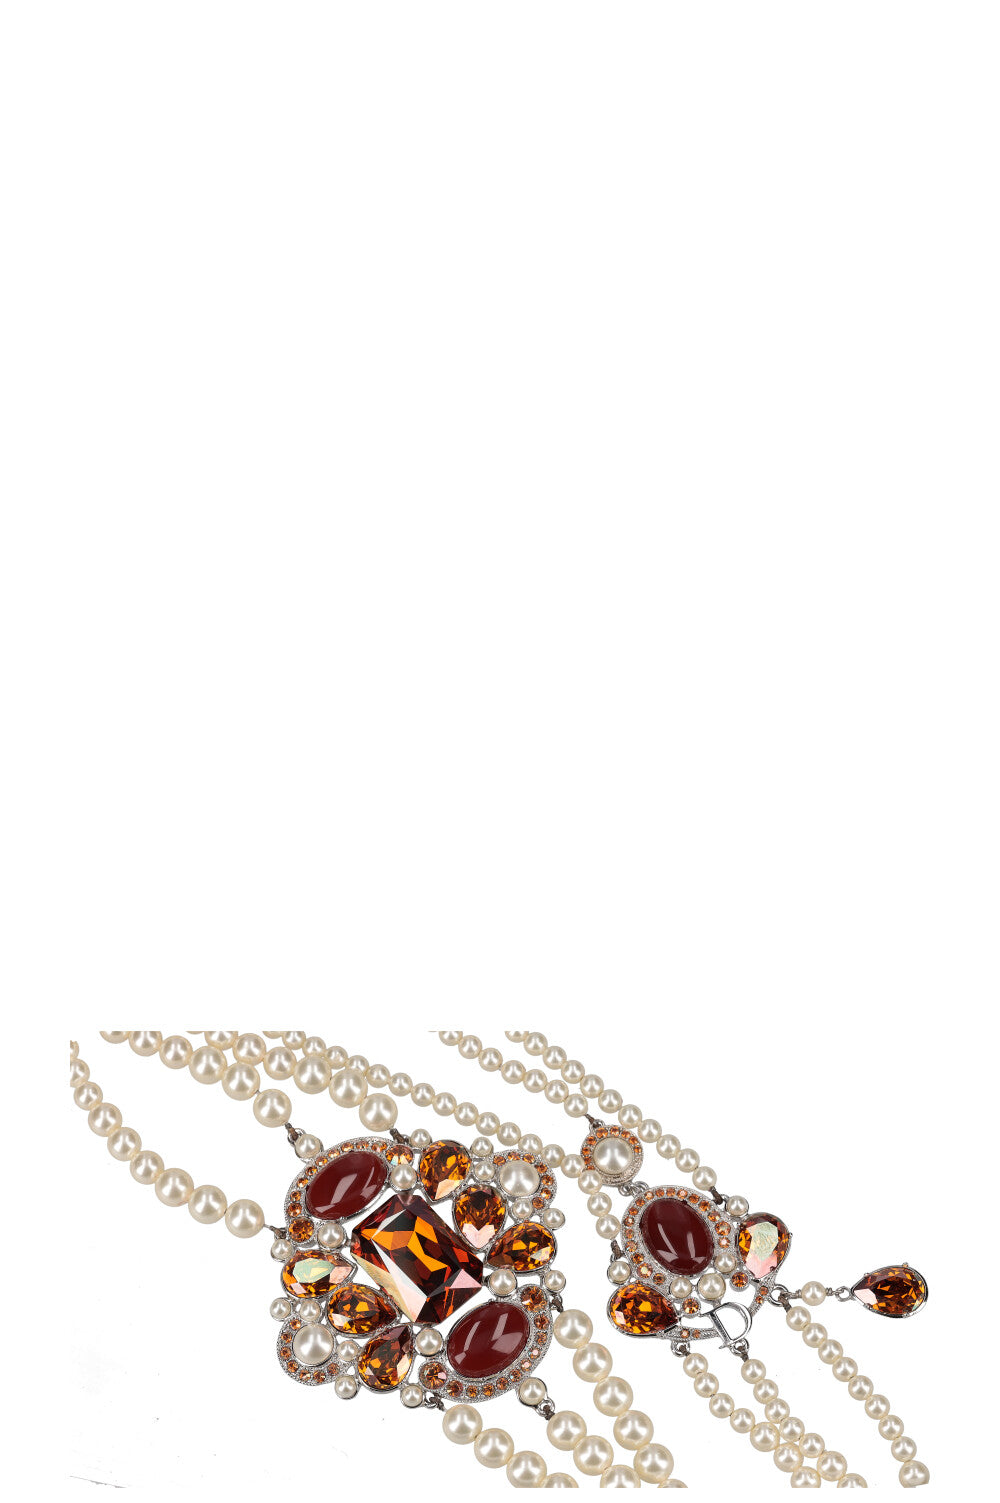 CHRISTIAN DIOR by Galliano Crystal Pearl Necklace